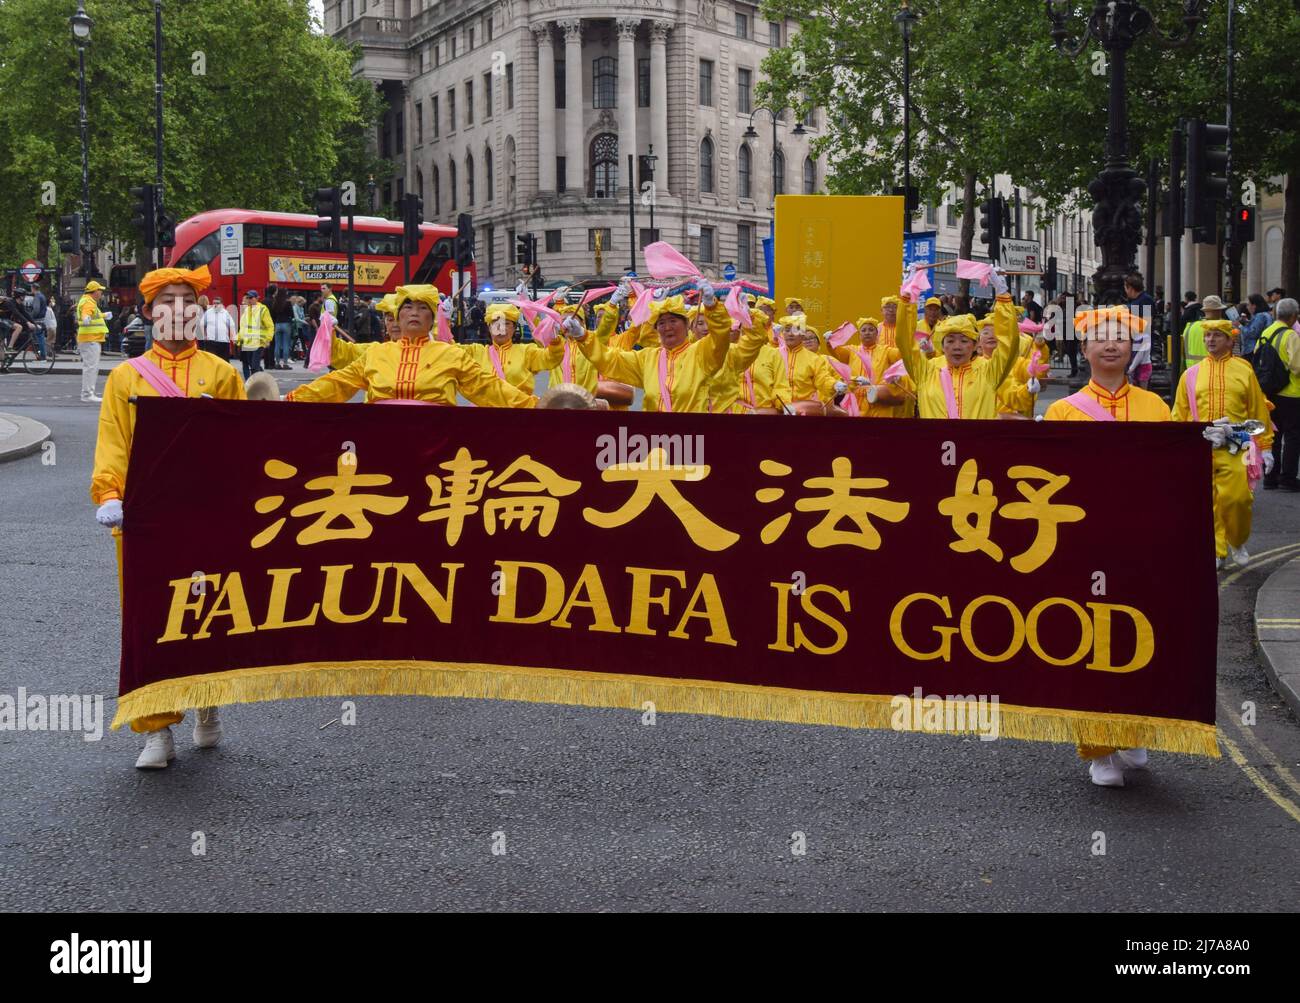 London, UK. 7th May 2022. Practitioners in Trafalgar Square. Falun Dafa (also known as Falun Gong) practitioners marched through central London to Downing Street on the 30th anniversary of the founding of the movement, to celebrate the practice and to raise awareness of the persecution faced by the practitioners in China. Falun Gong combines meditation and Qigong exercises with moral philosophy, and has been subjected to an ongoing crackdown by the Chinese Communist Party. Credit: Vuk Valcic/Alamy Live News Stock Photo